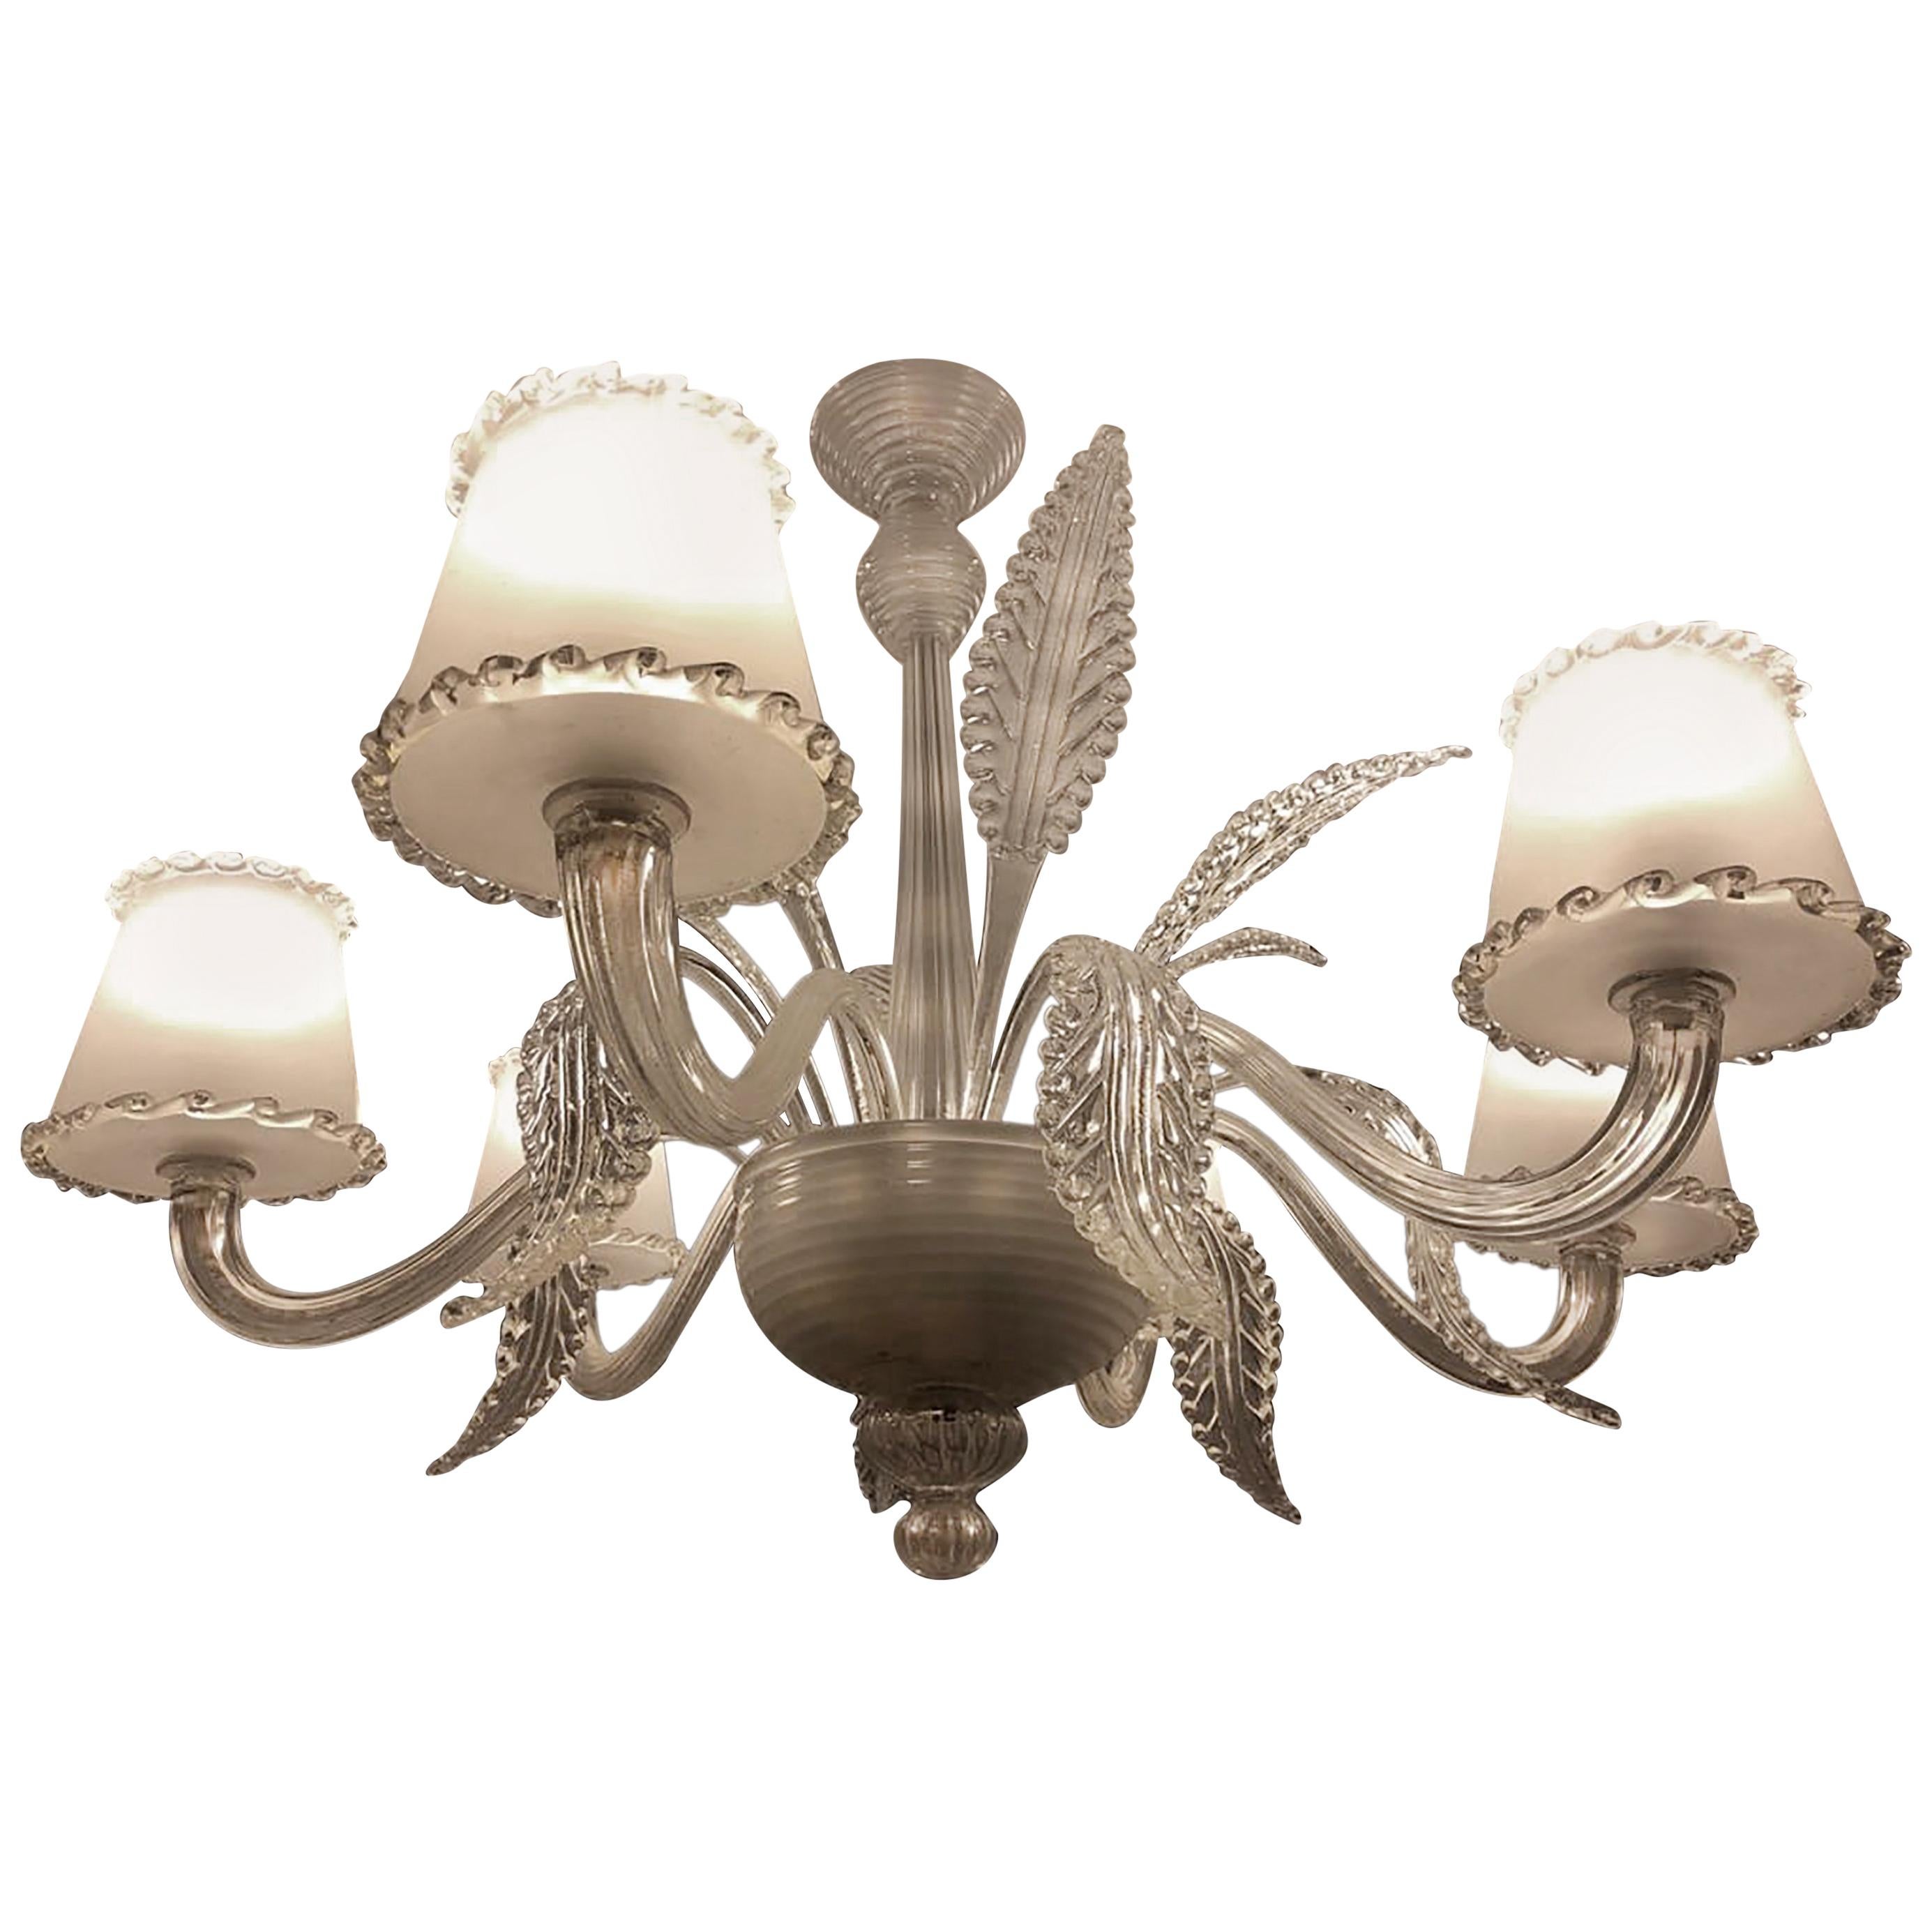 Italian Murano 1940s chandelier by Barovier e Toso with six large fluted and scalloped top shades. A masterpiece from the historic Murano furnace.